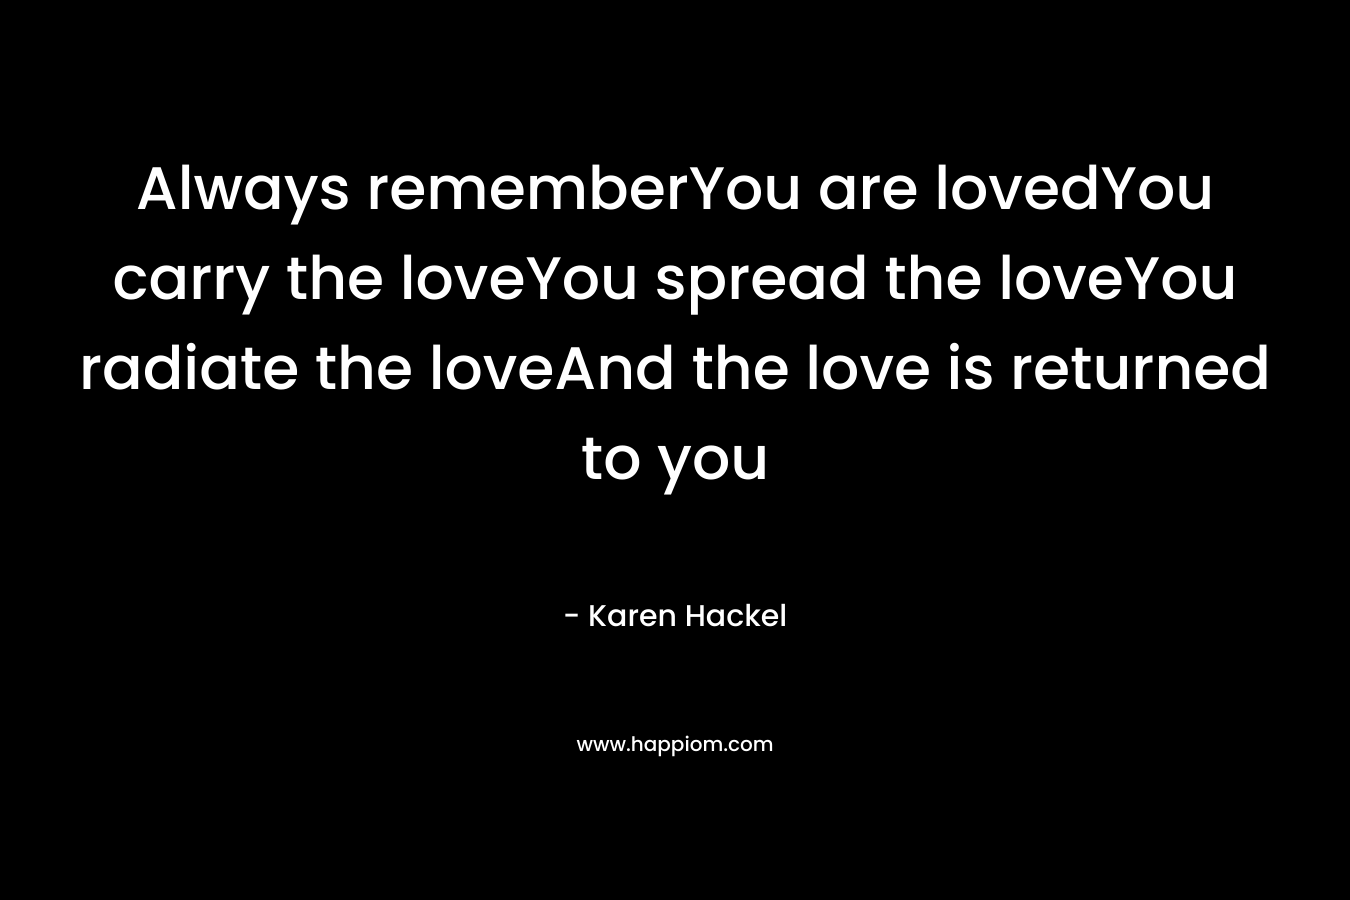 Always rememberYou are lovedYou carry the loveYou spread the loveYou radiate the loveAnd the love is returned to you – Karen Hackel